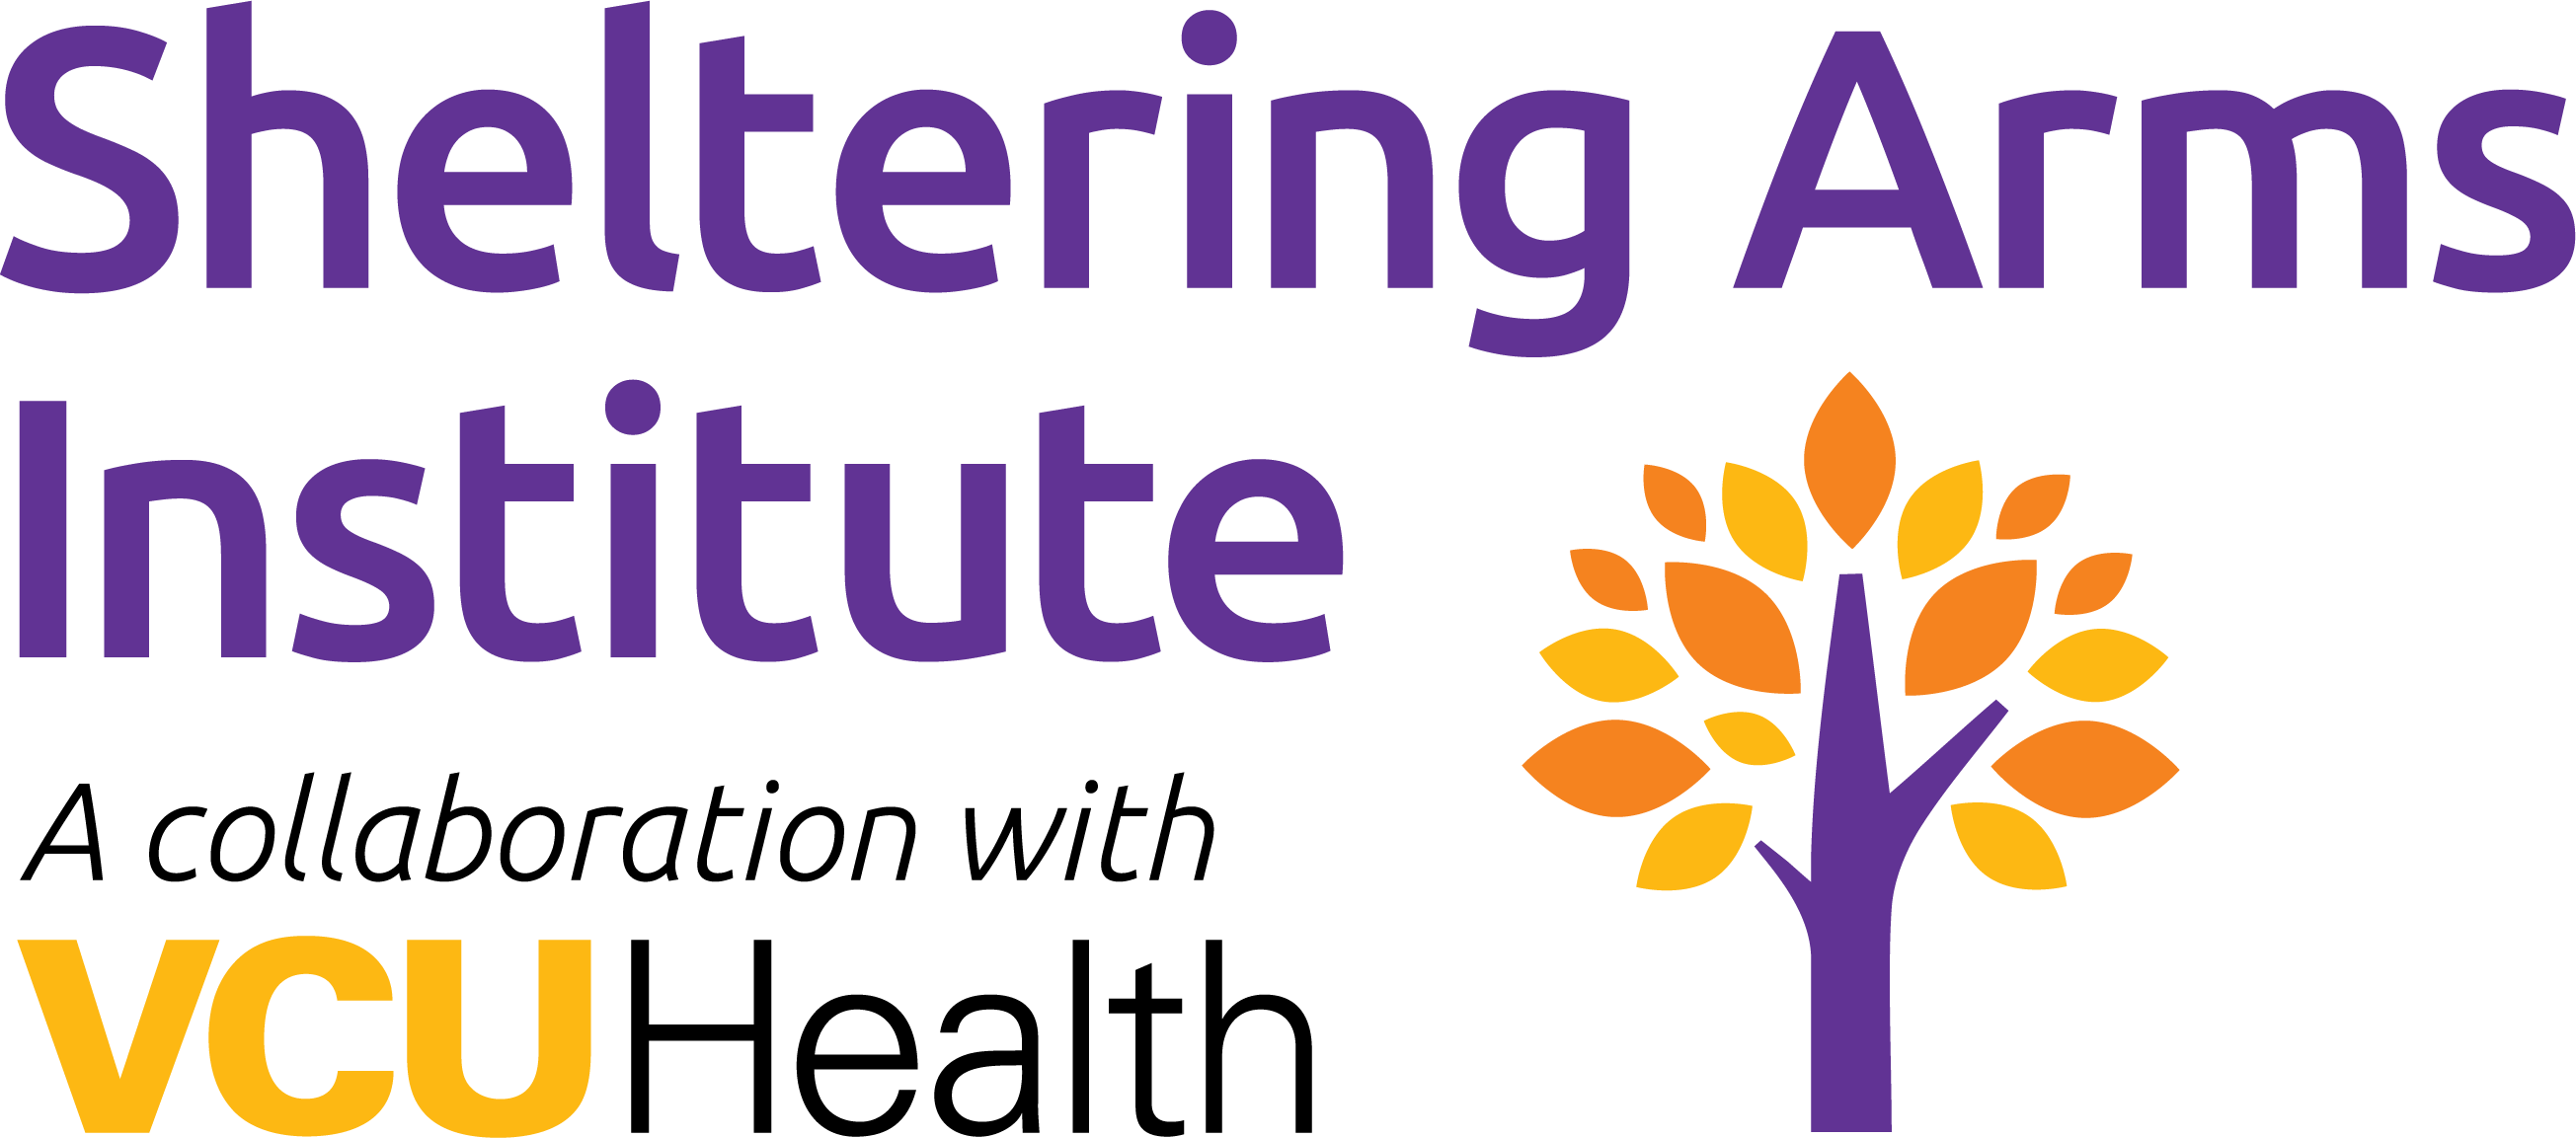 Sheltering Arms Institute Company Logo